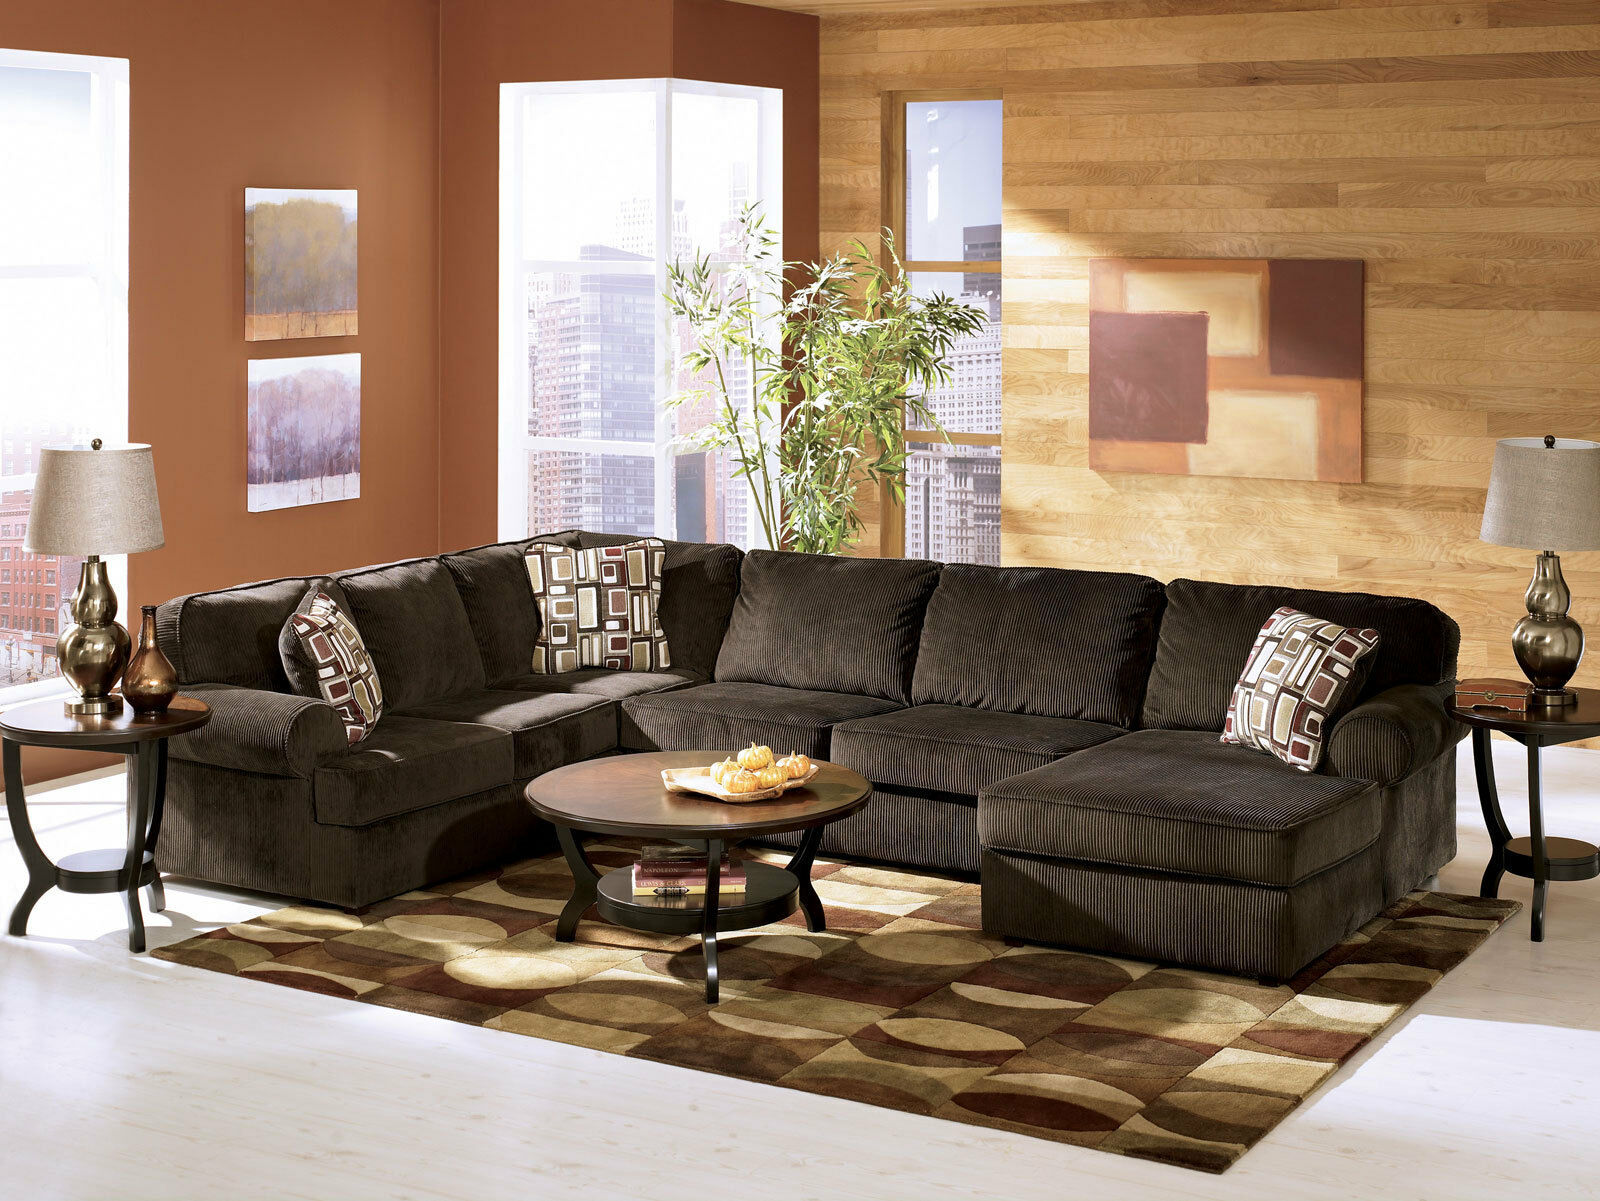 CANNA Large Sectional Living Room Couch Set Brown Fabric Sofa Chaise - CLEARANCE - Sofas ...